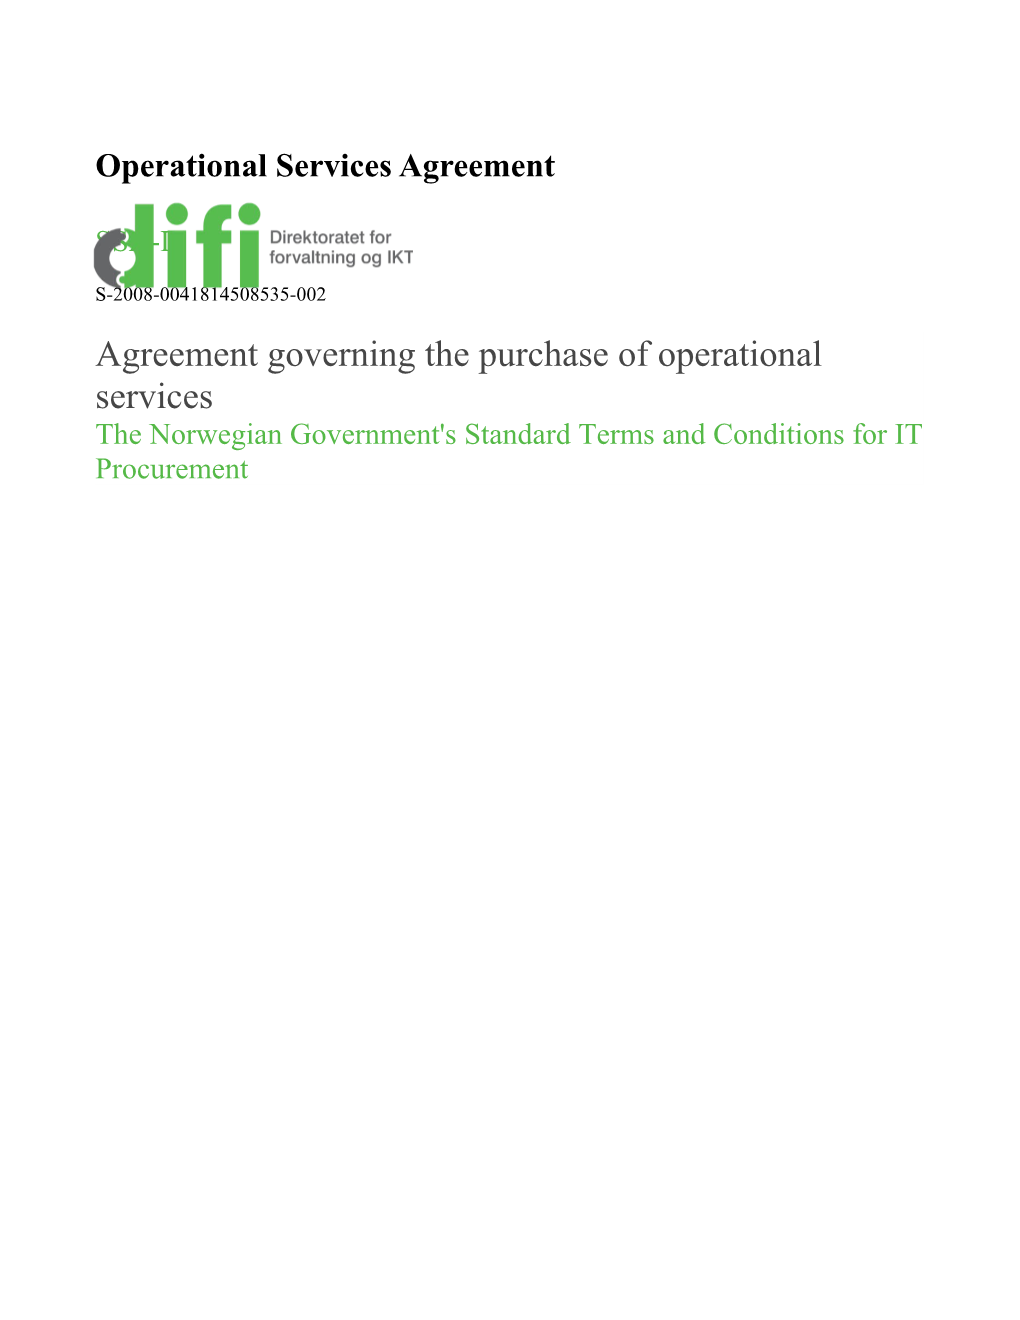 Agreement Governing the Purchase of Operational Services